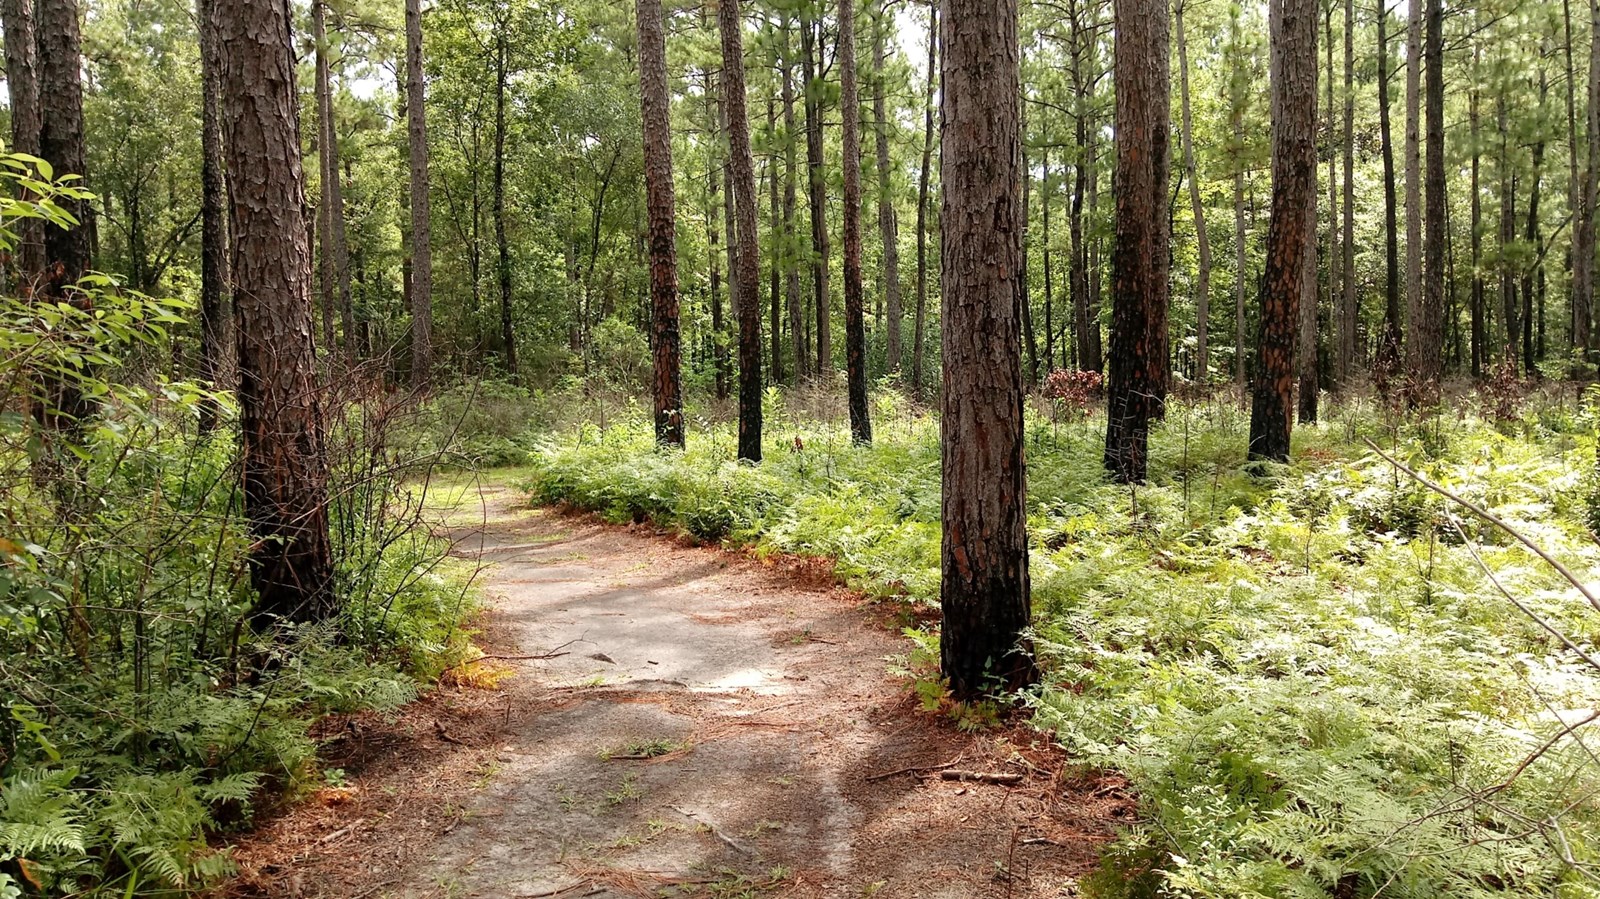 dirt path leading through a forest of pines and ferns